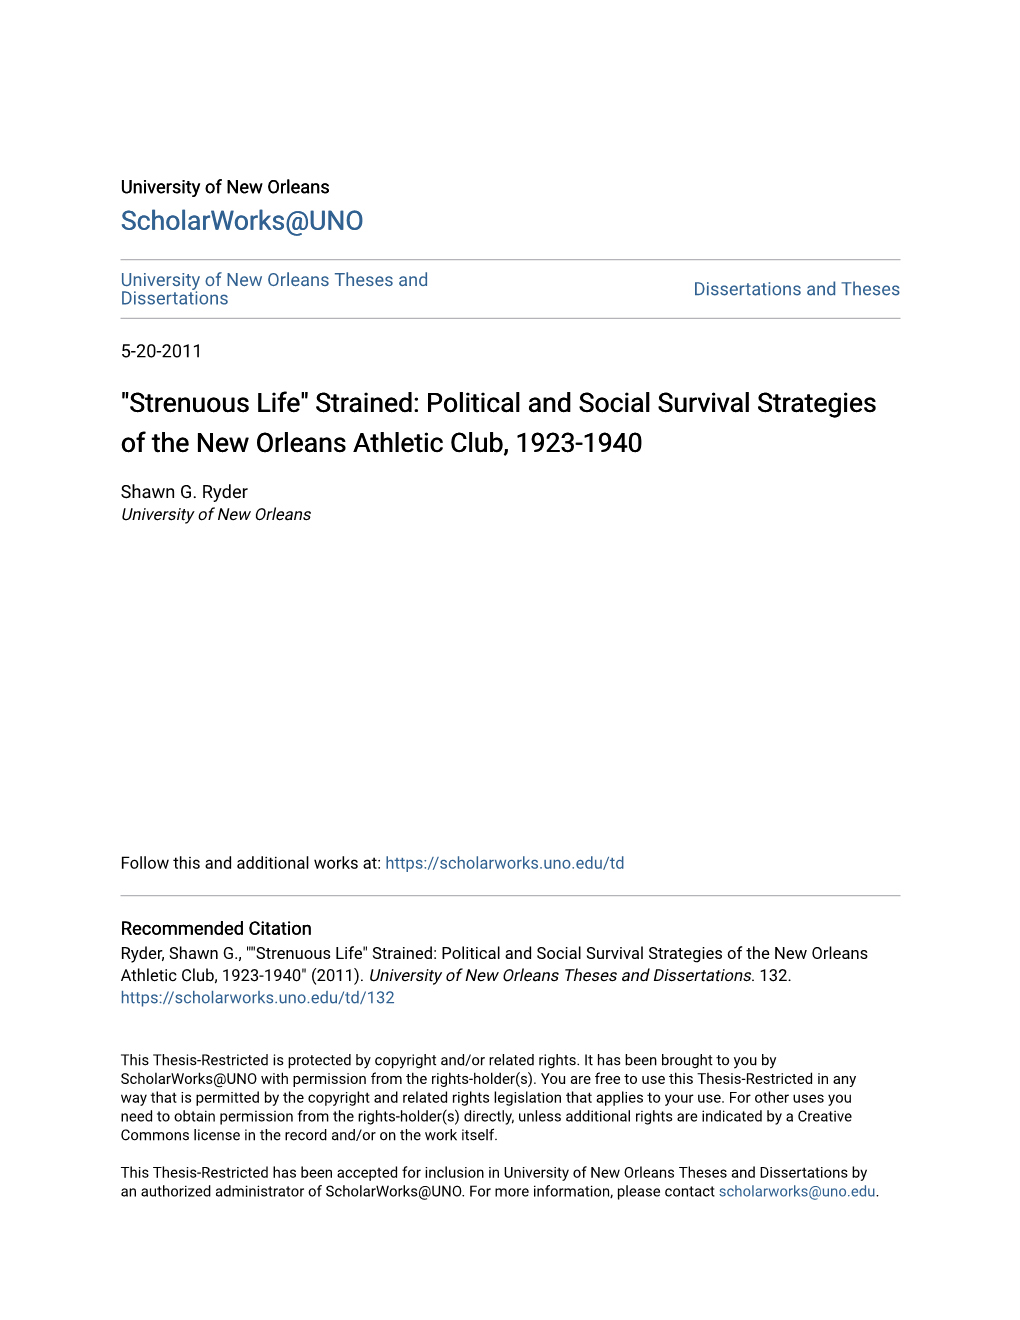 "Strenuous Life" Strained: Political and Social Survival Strategies of the New Orleans Athletic Club, 1923-1940